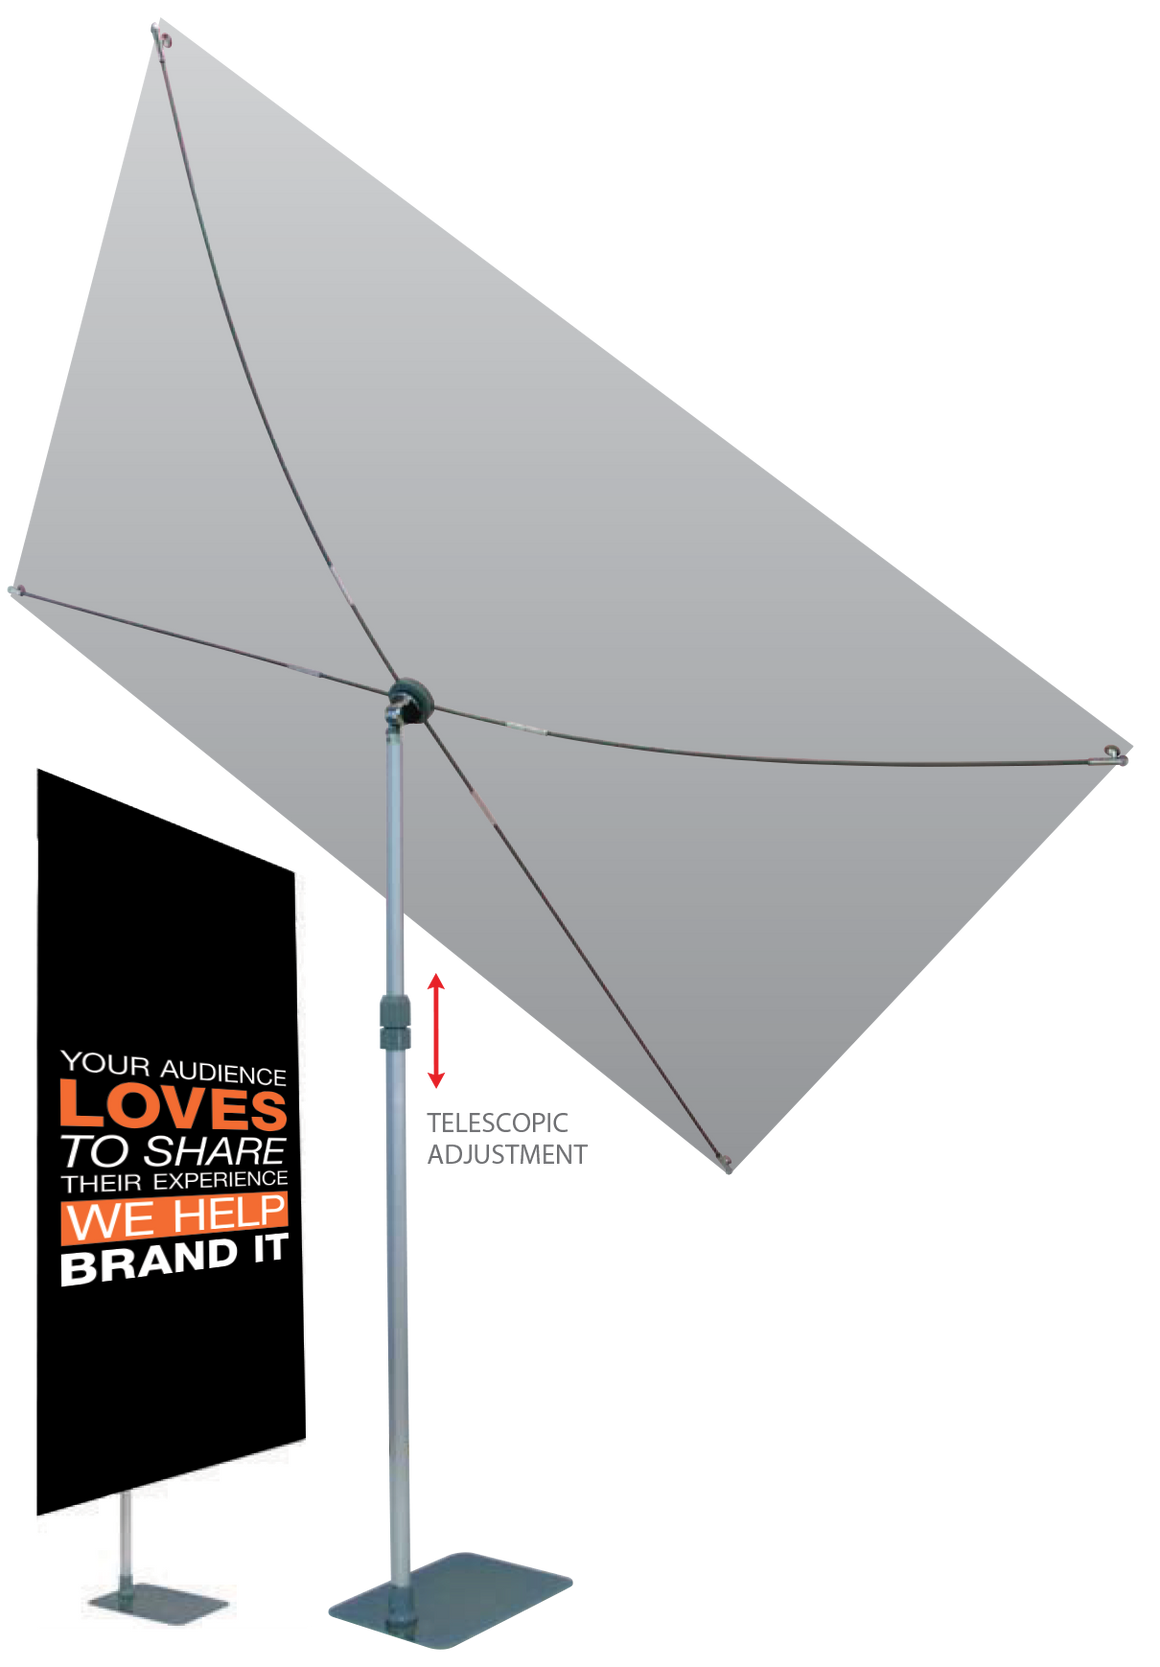 Telescopic Banner Stand